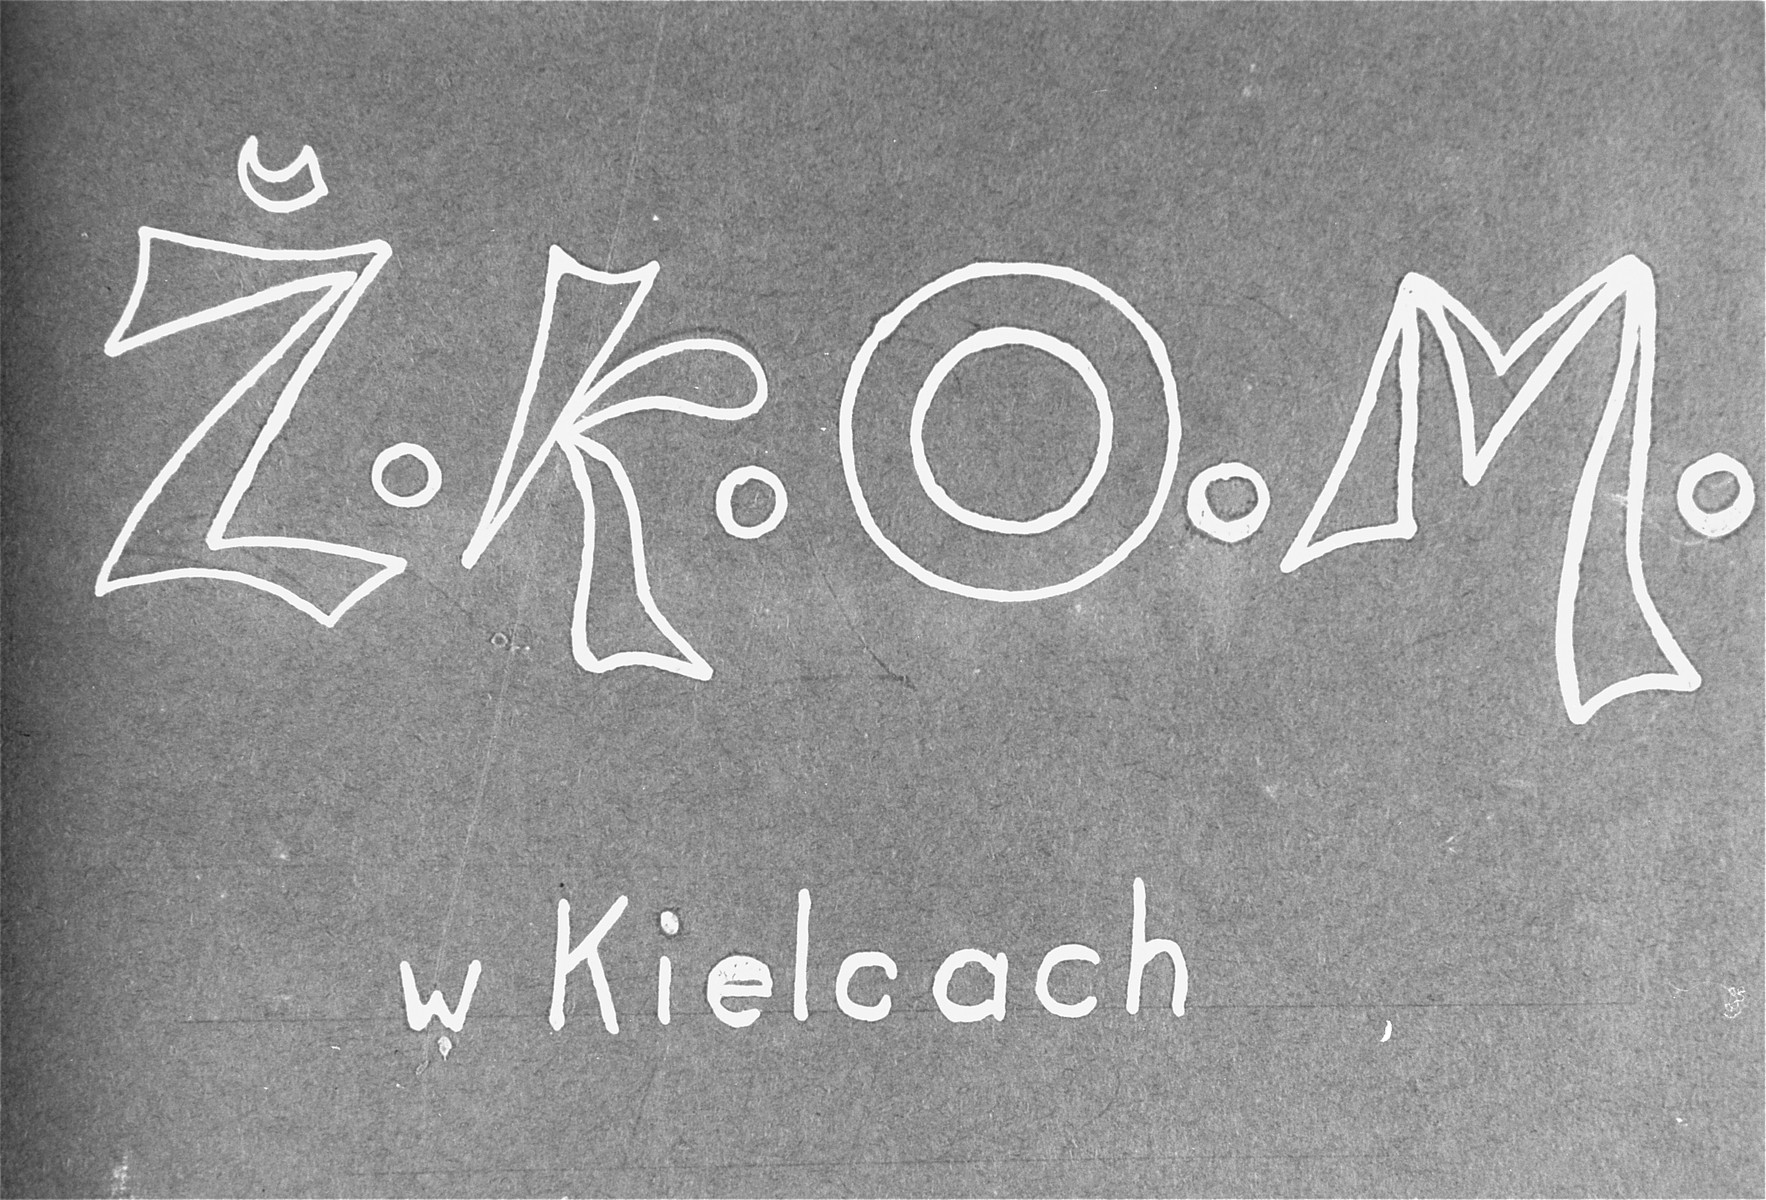 First page of an album prepared by the employees of the Jewish Council in the Kielce ghetto for the chairman of the council. The letters Z.K.O.M. stand for Jewish Welfare City Committee.